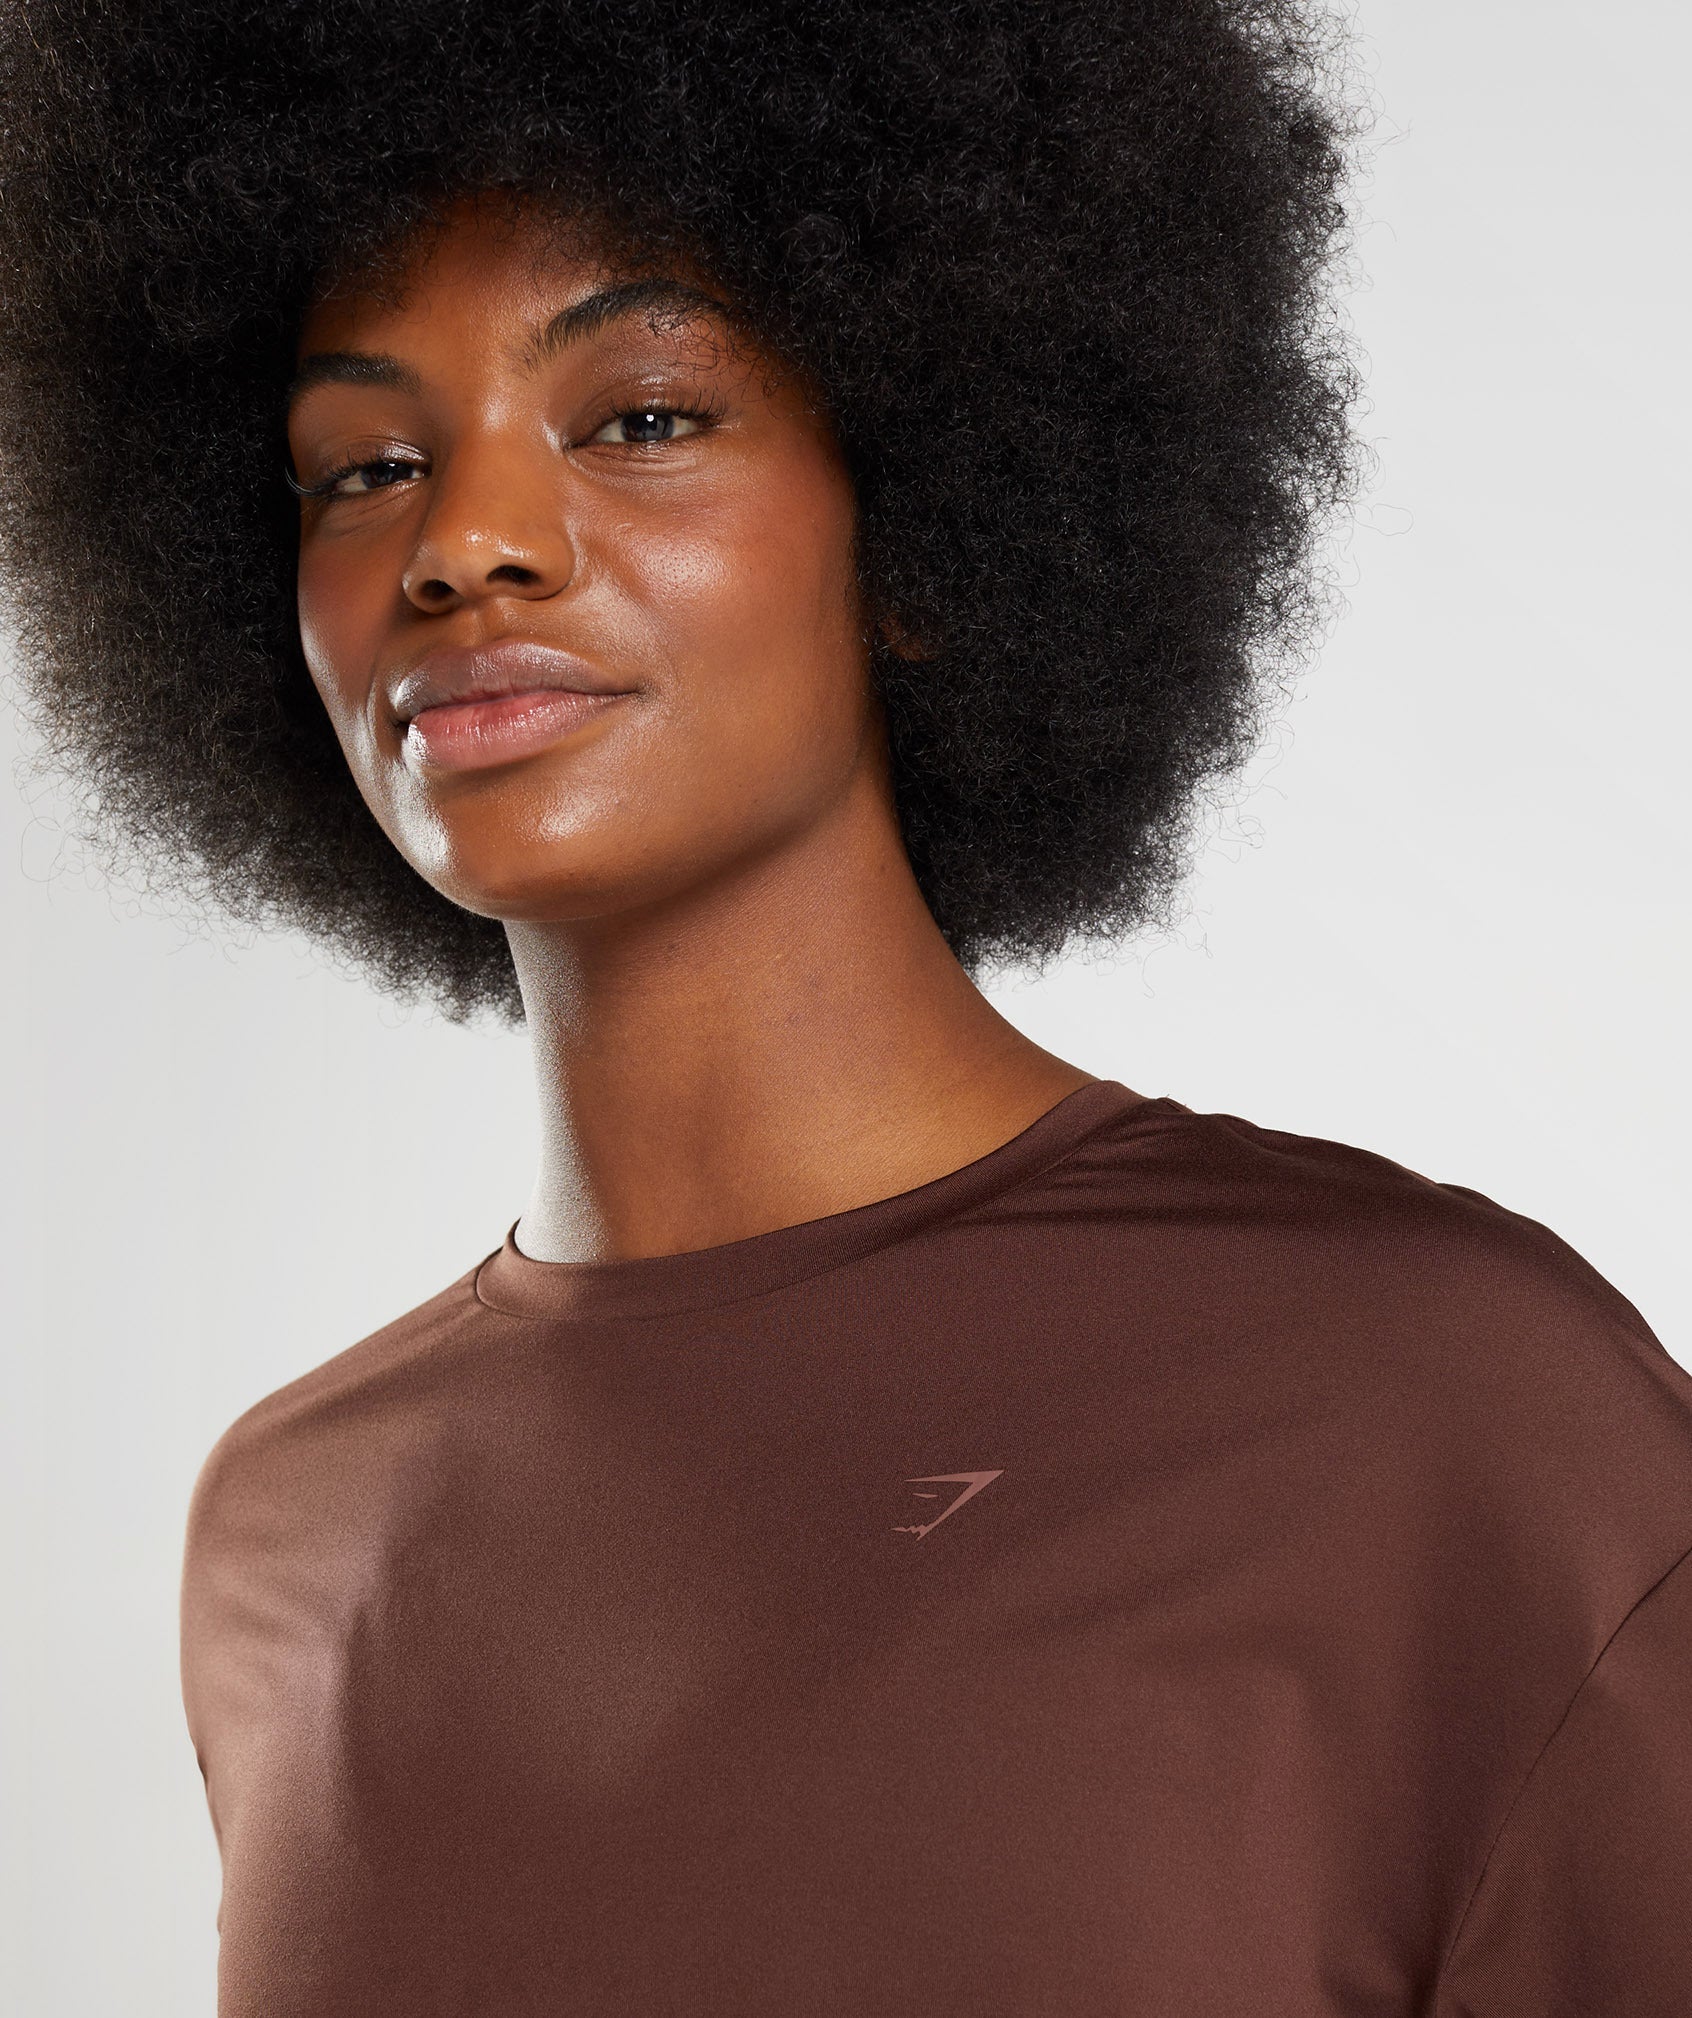 Whitney Oversized T-Shirt in Rekindle Brown - view 5